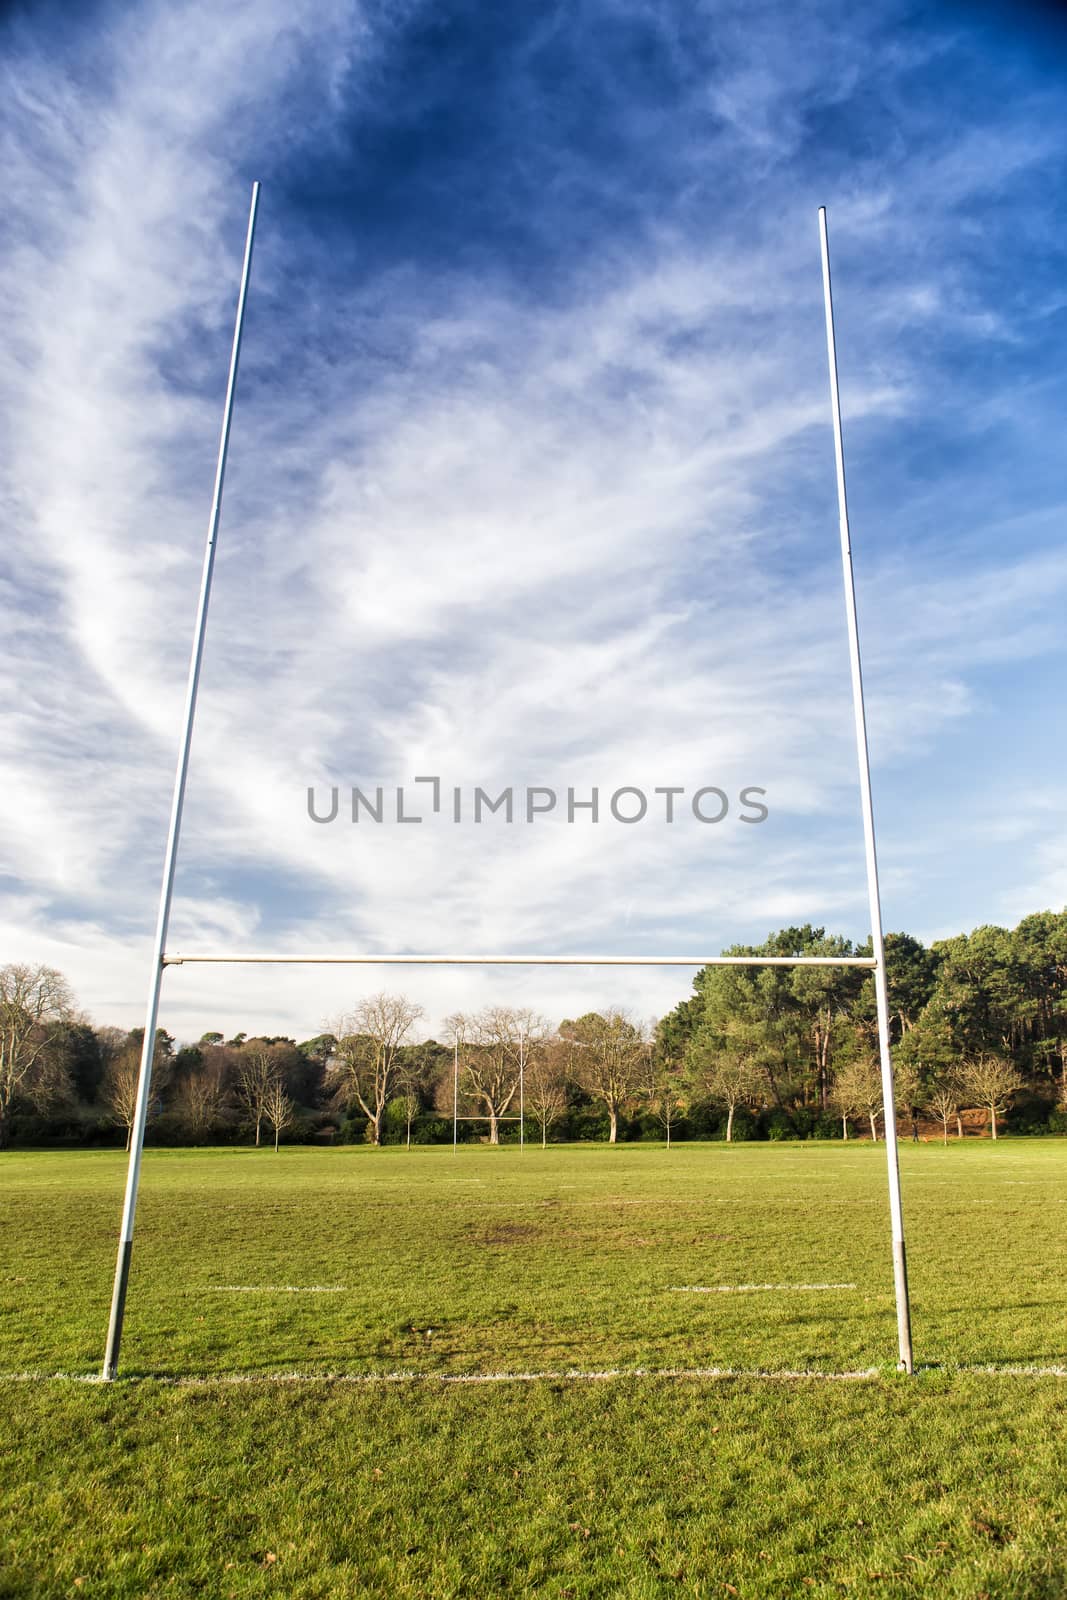 Rugby field in a sunny day by mitakag